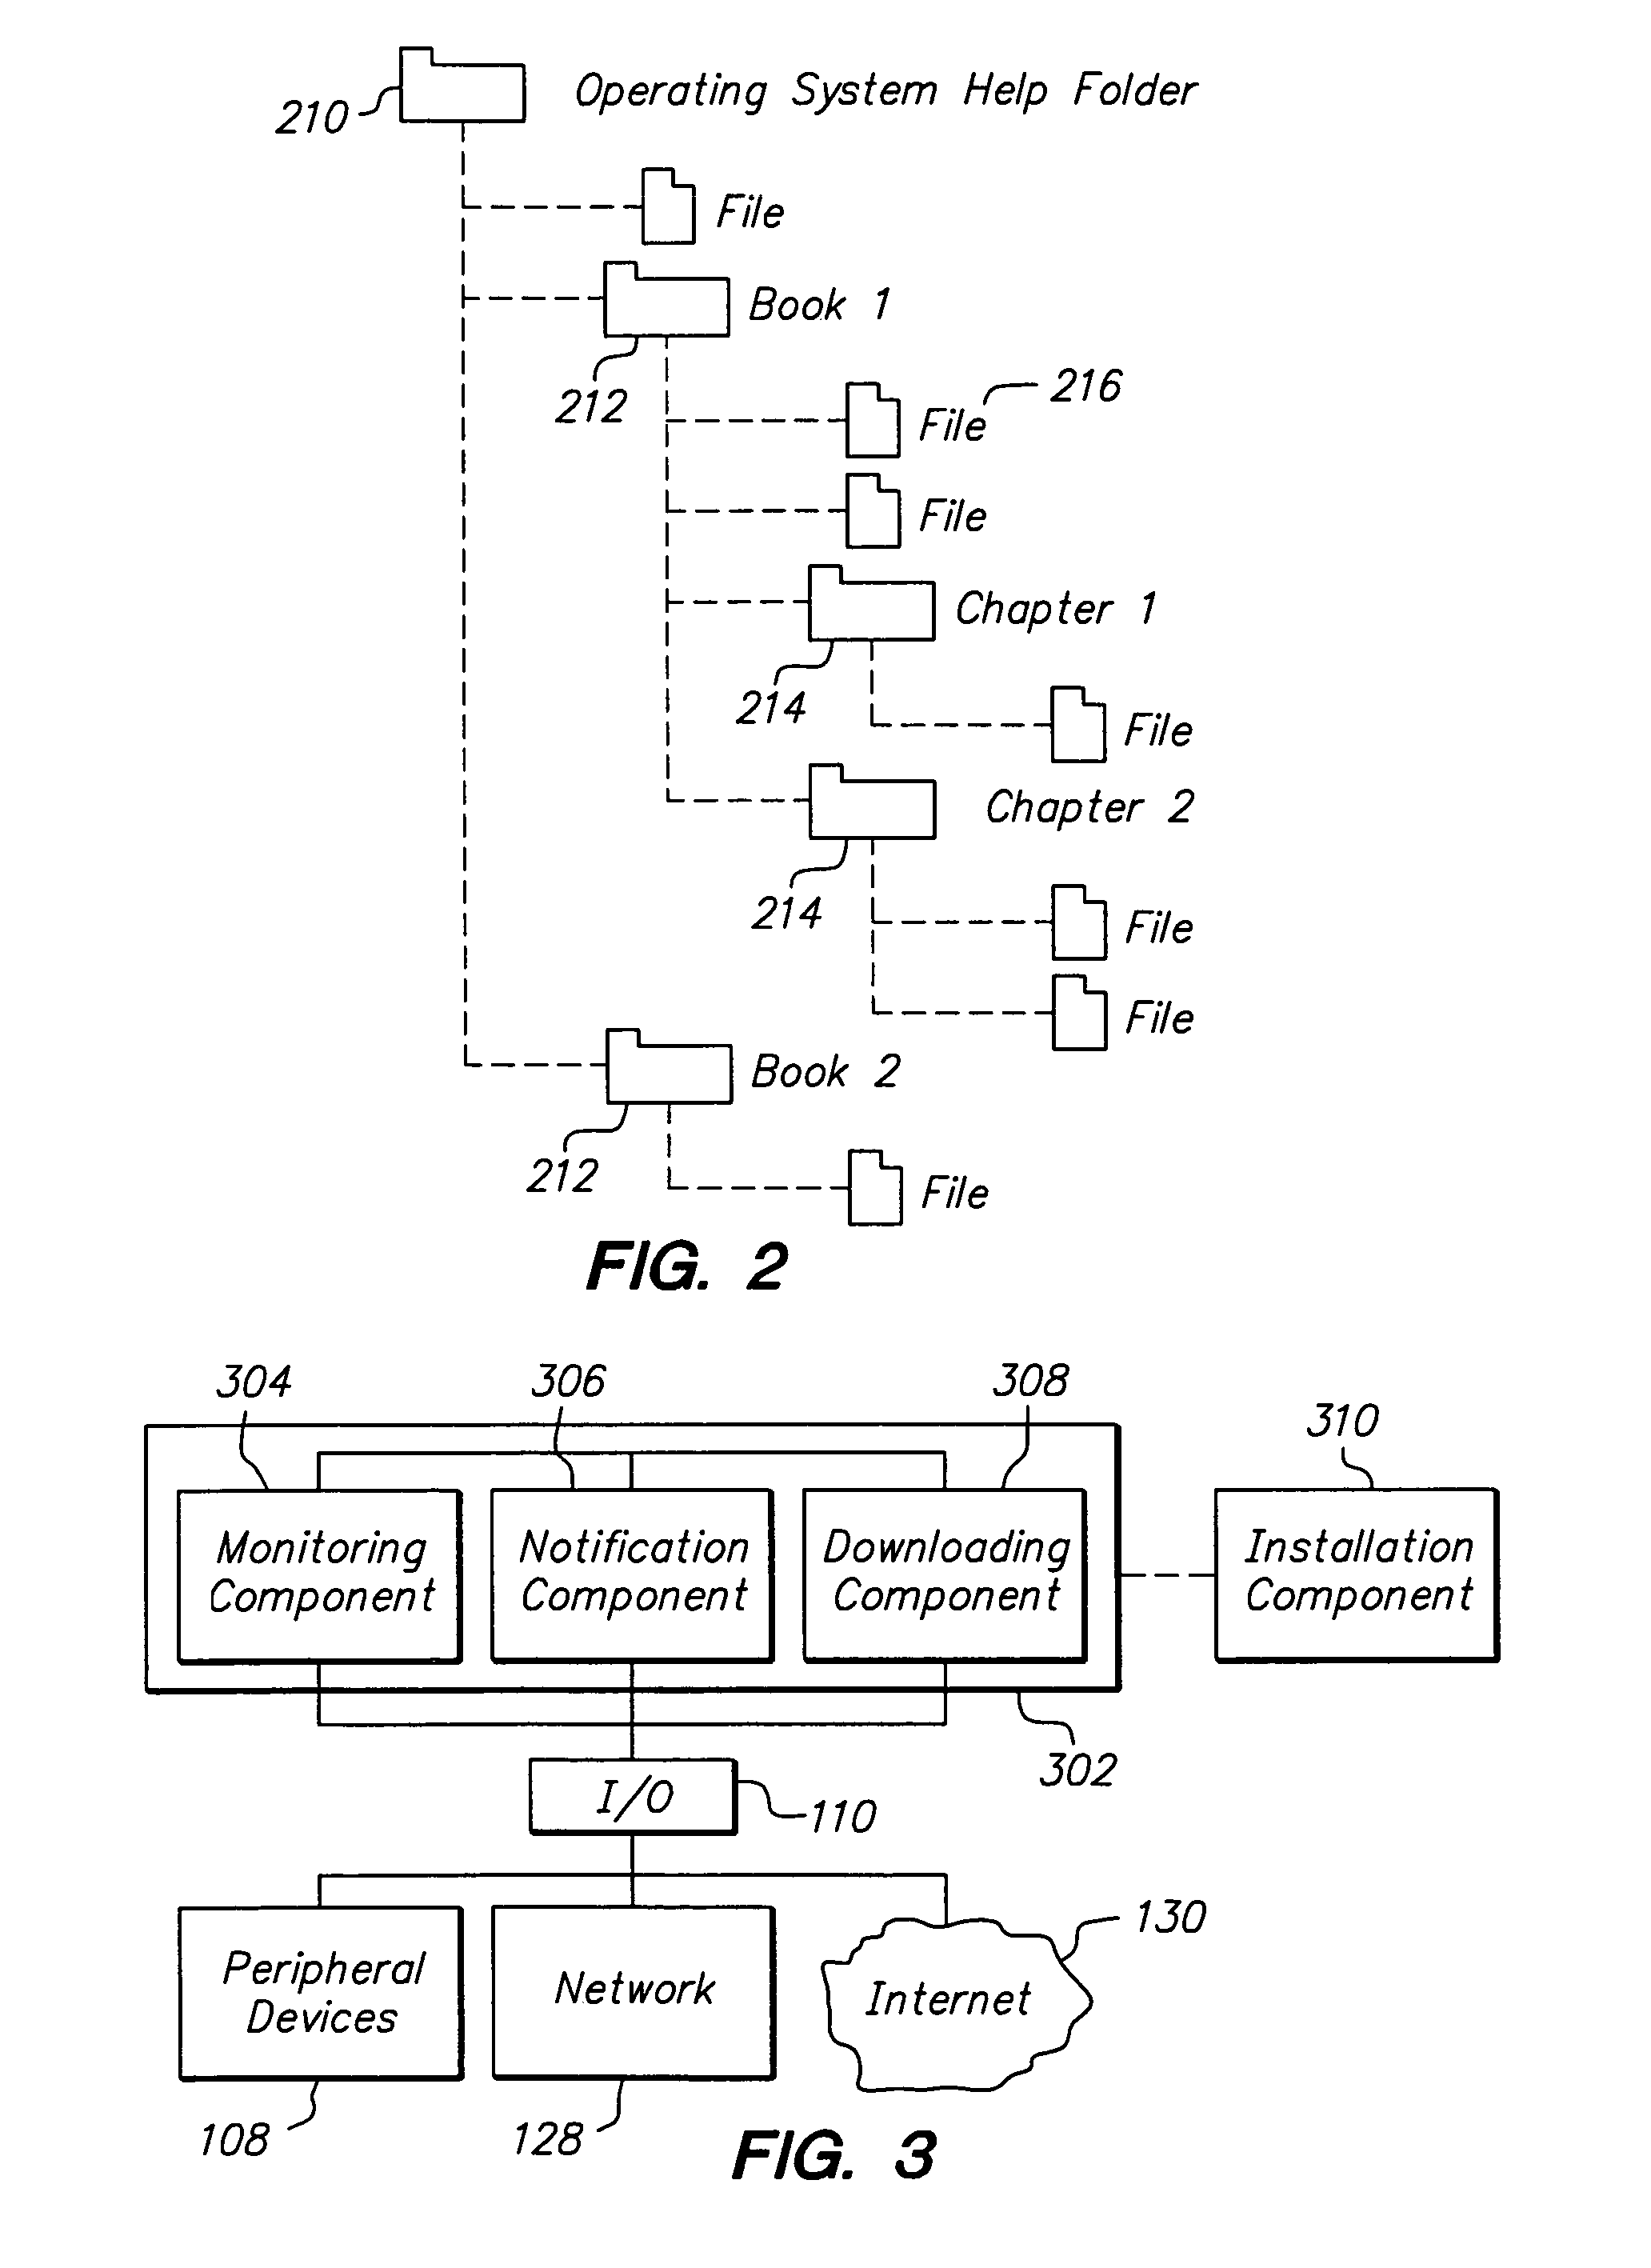 System and method for passive detection and context sensitive notification of upgrade availability for computer information